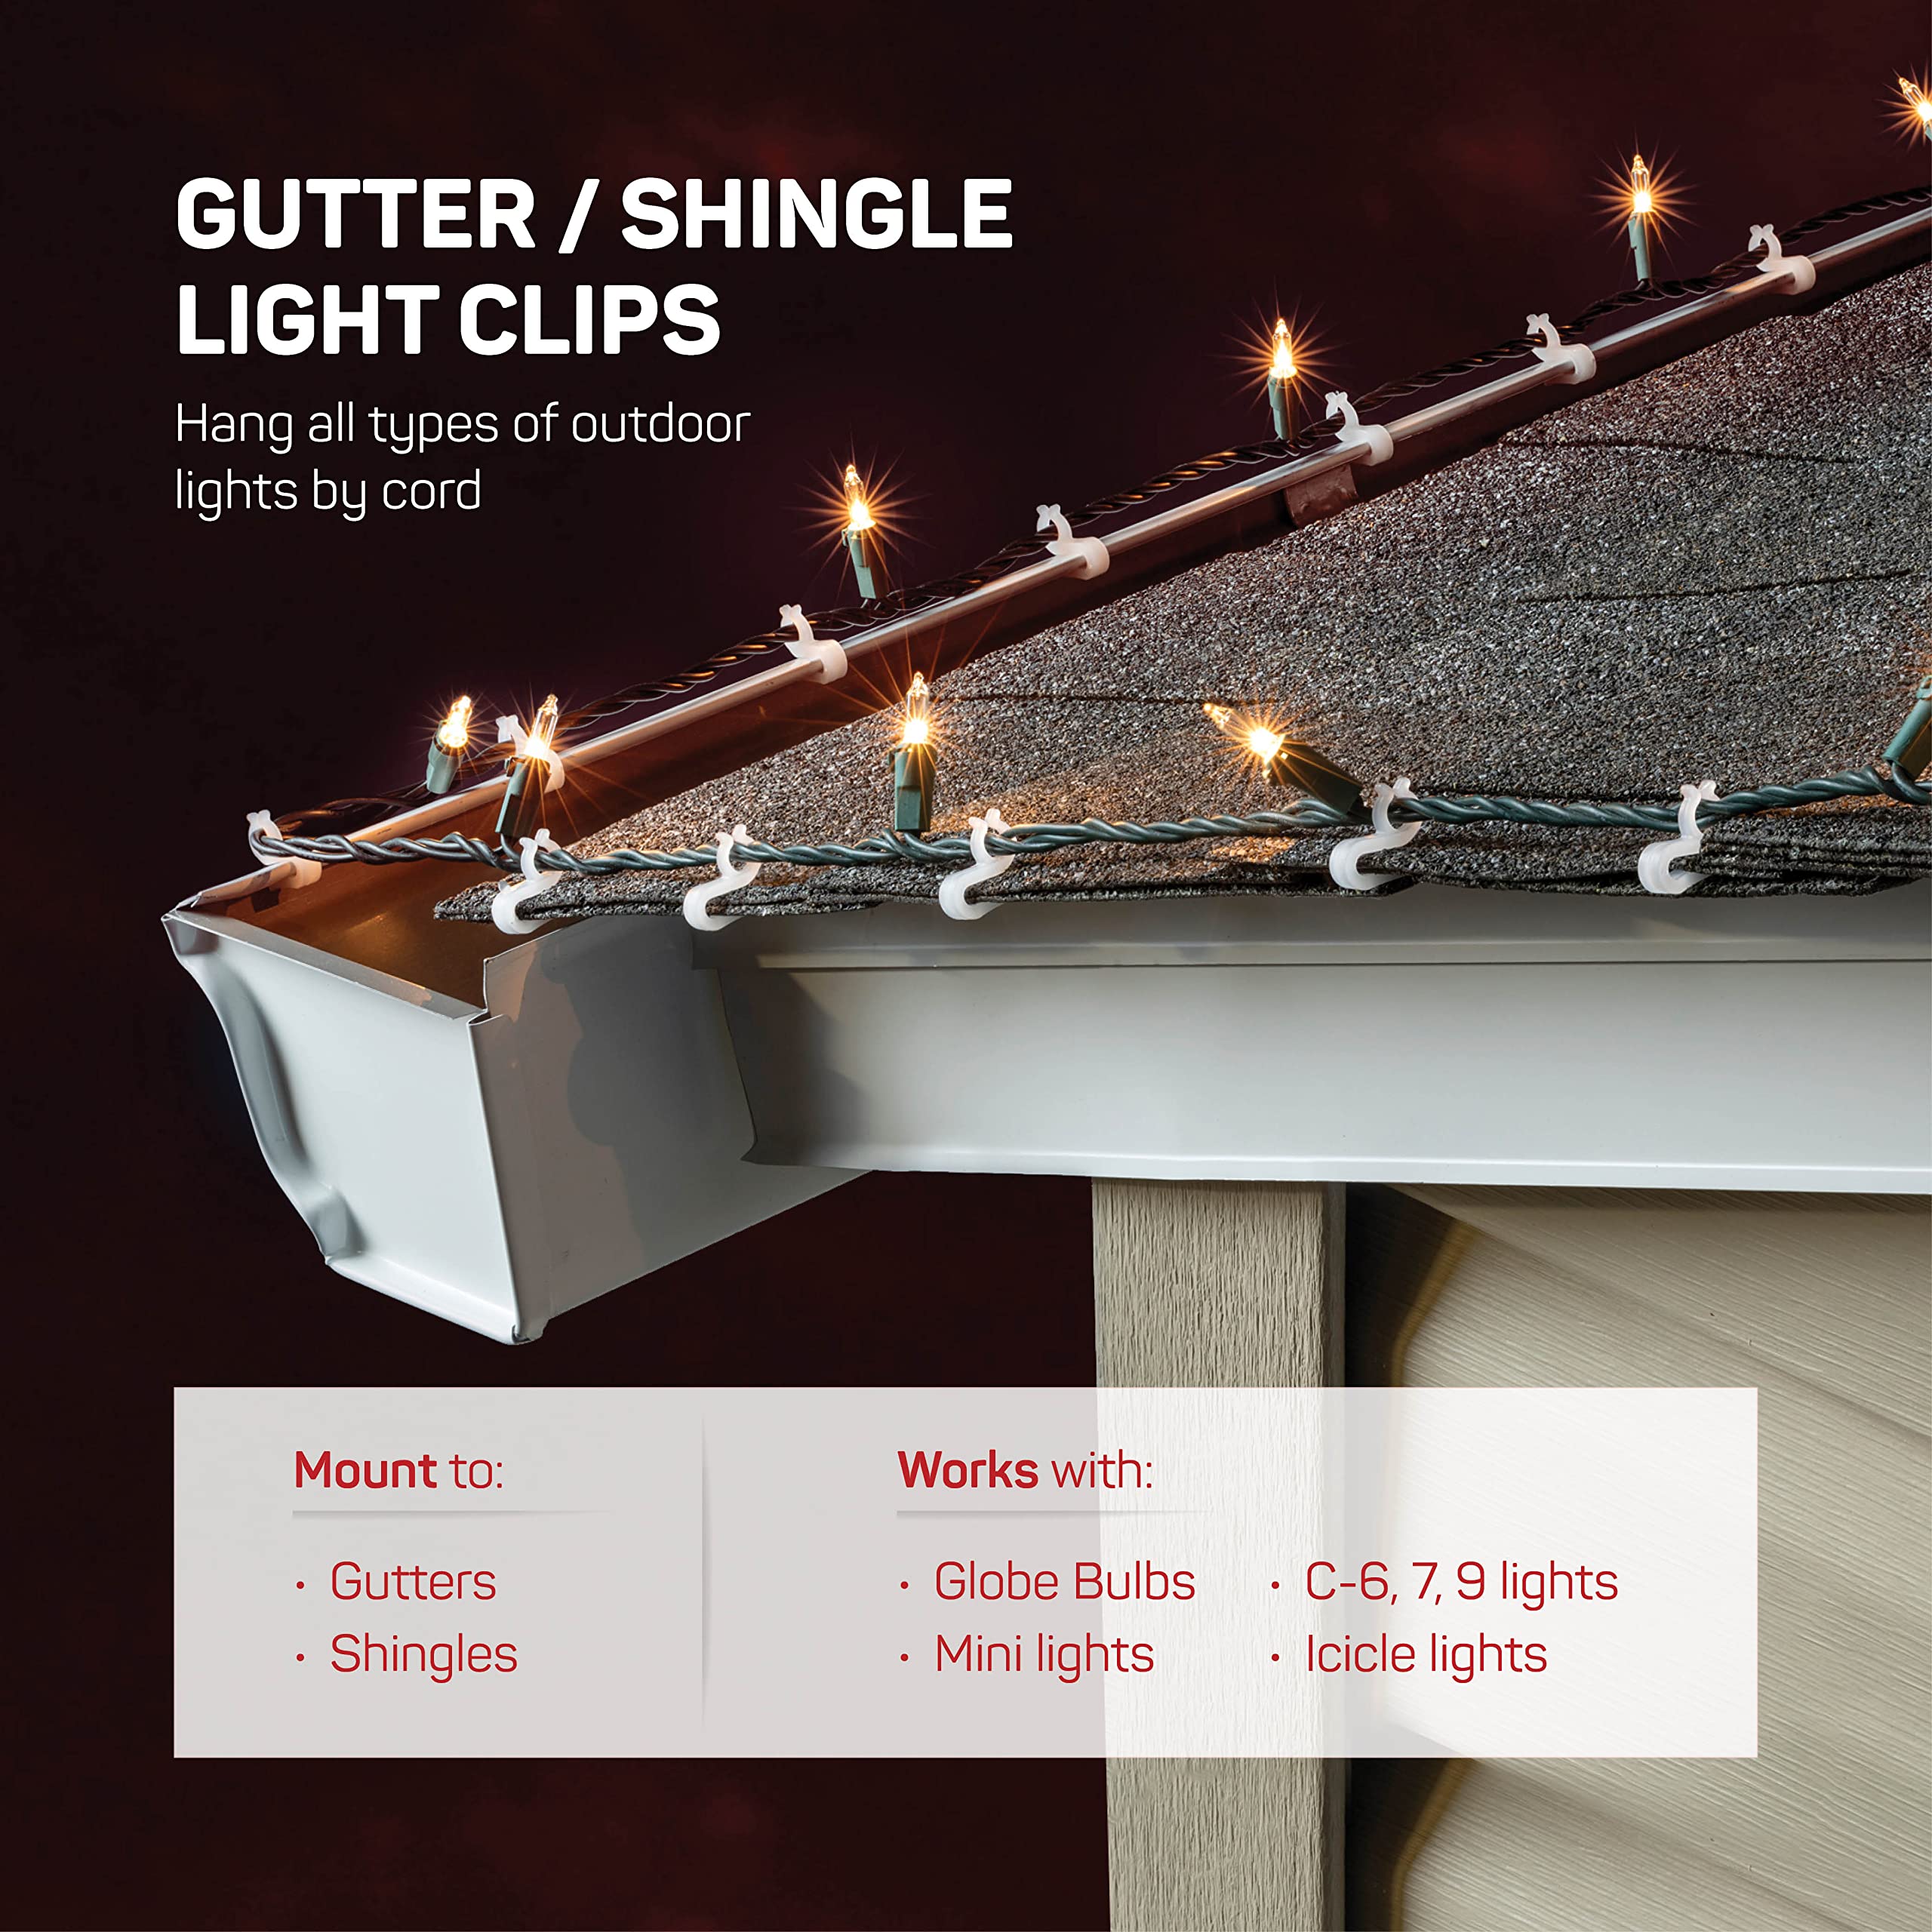 Christmas Light Clips - [Set of 200] Mini Light Clips For Christmas Lights - Light Clips For Gutters - Light Clips For Shingles - Gutter Clips For Hanging Outdoor Lights - USA Made - No Tools Required  - Very Good